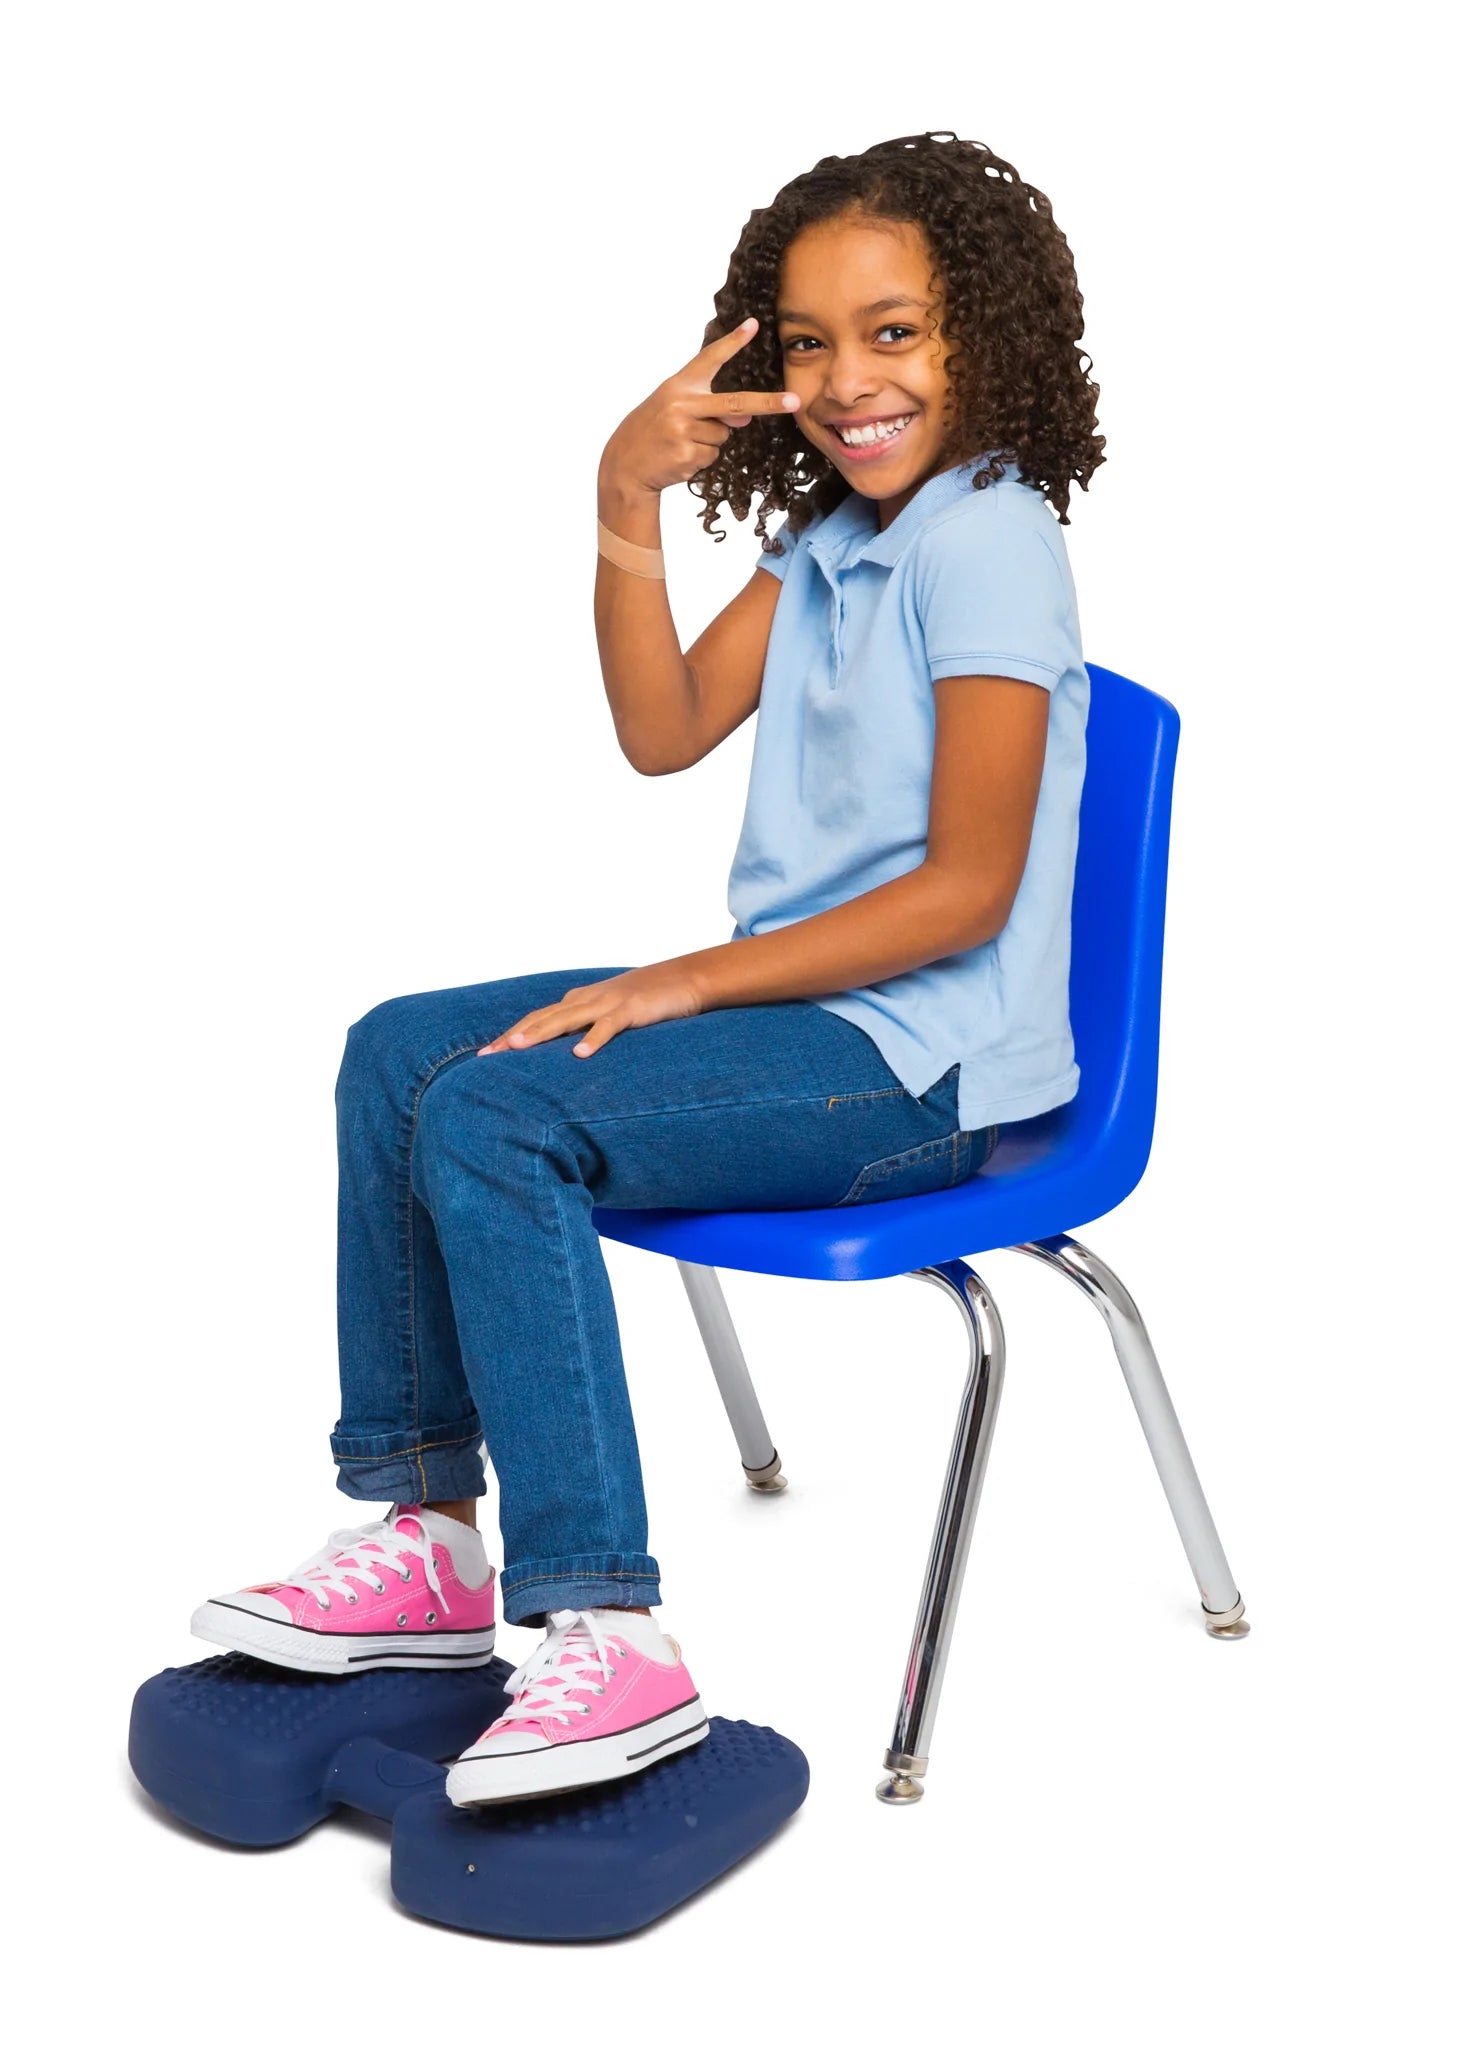 A child with medium skin tone and curly dark brown hair sits on a school chair. Their feet are resting on Wiggle Feet and they are smiling with their hand in a pose in front of their face.